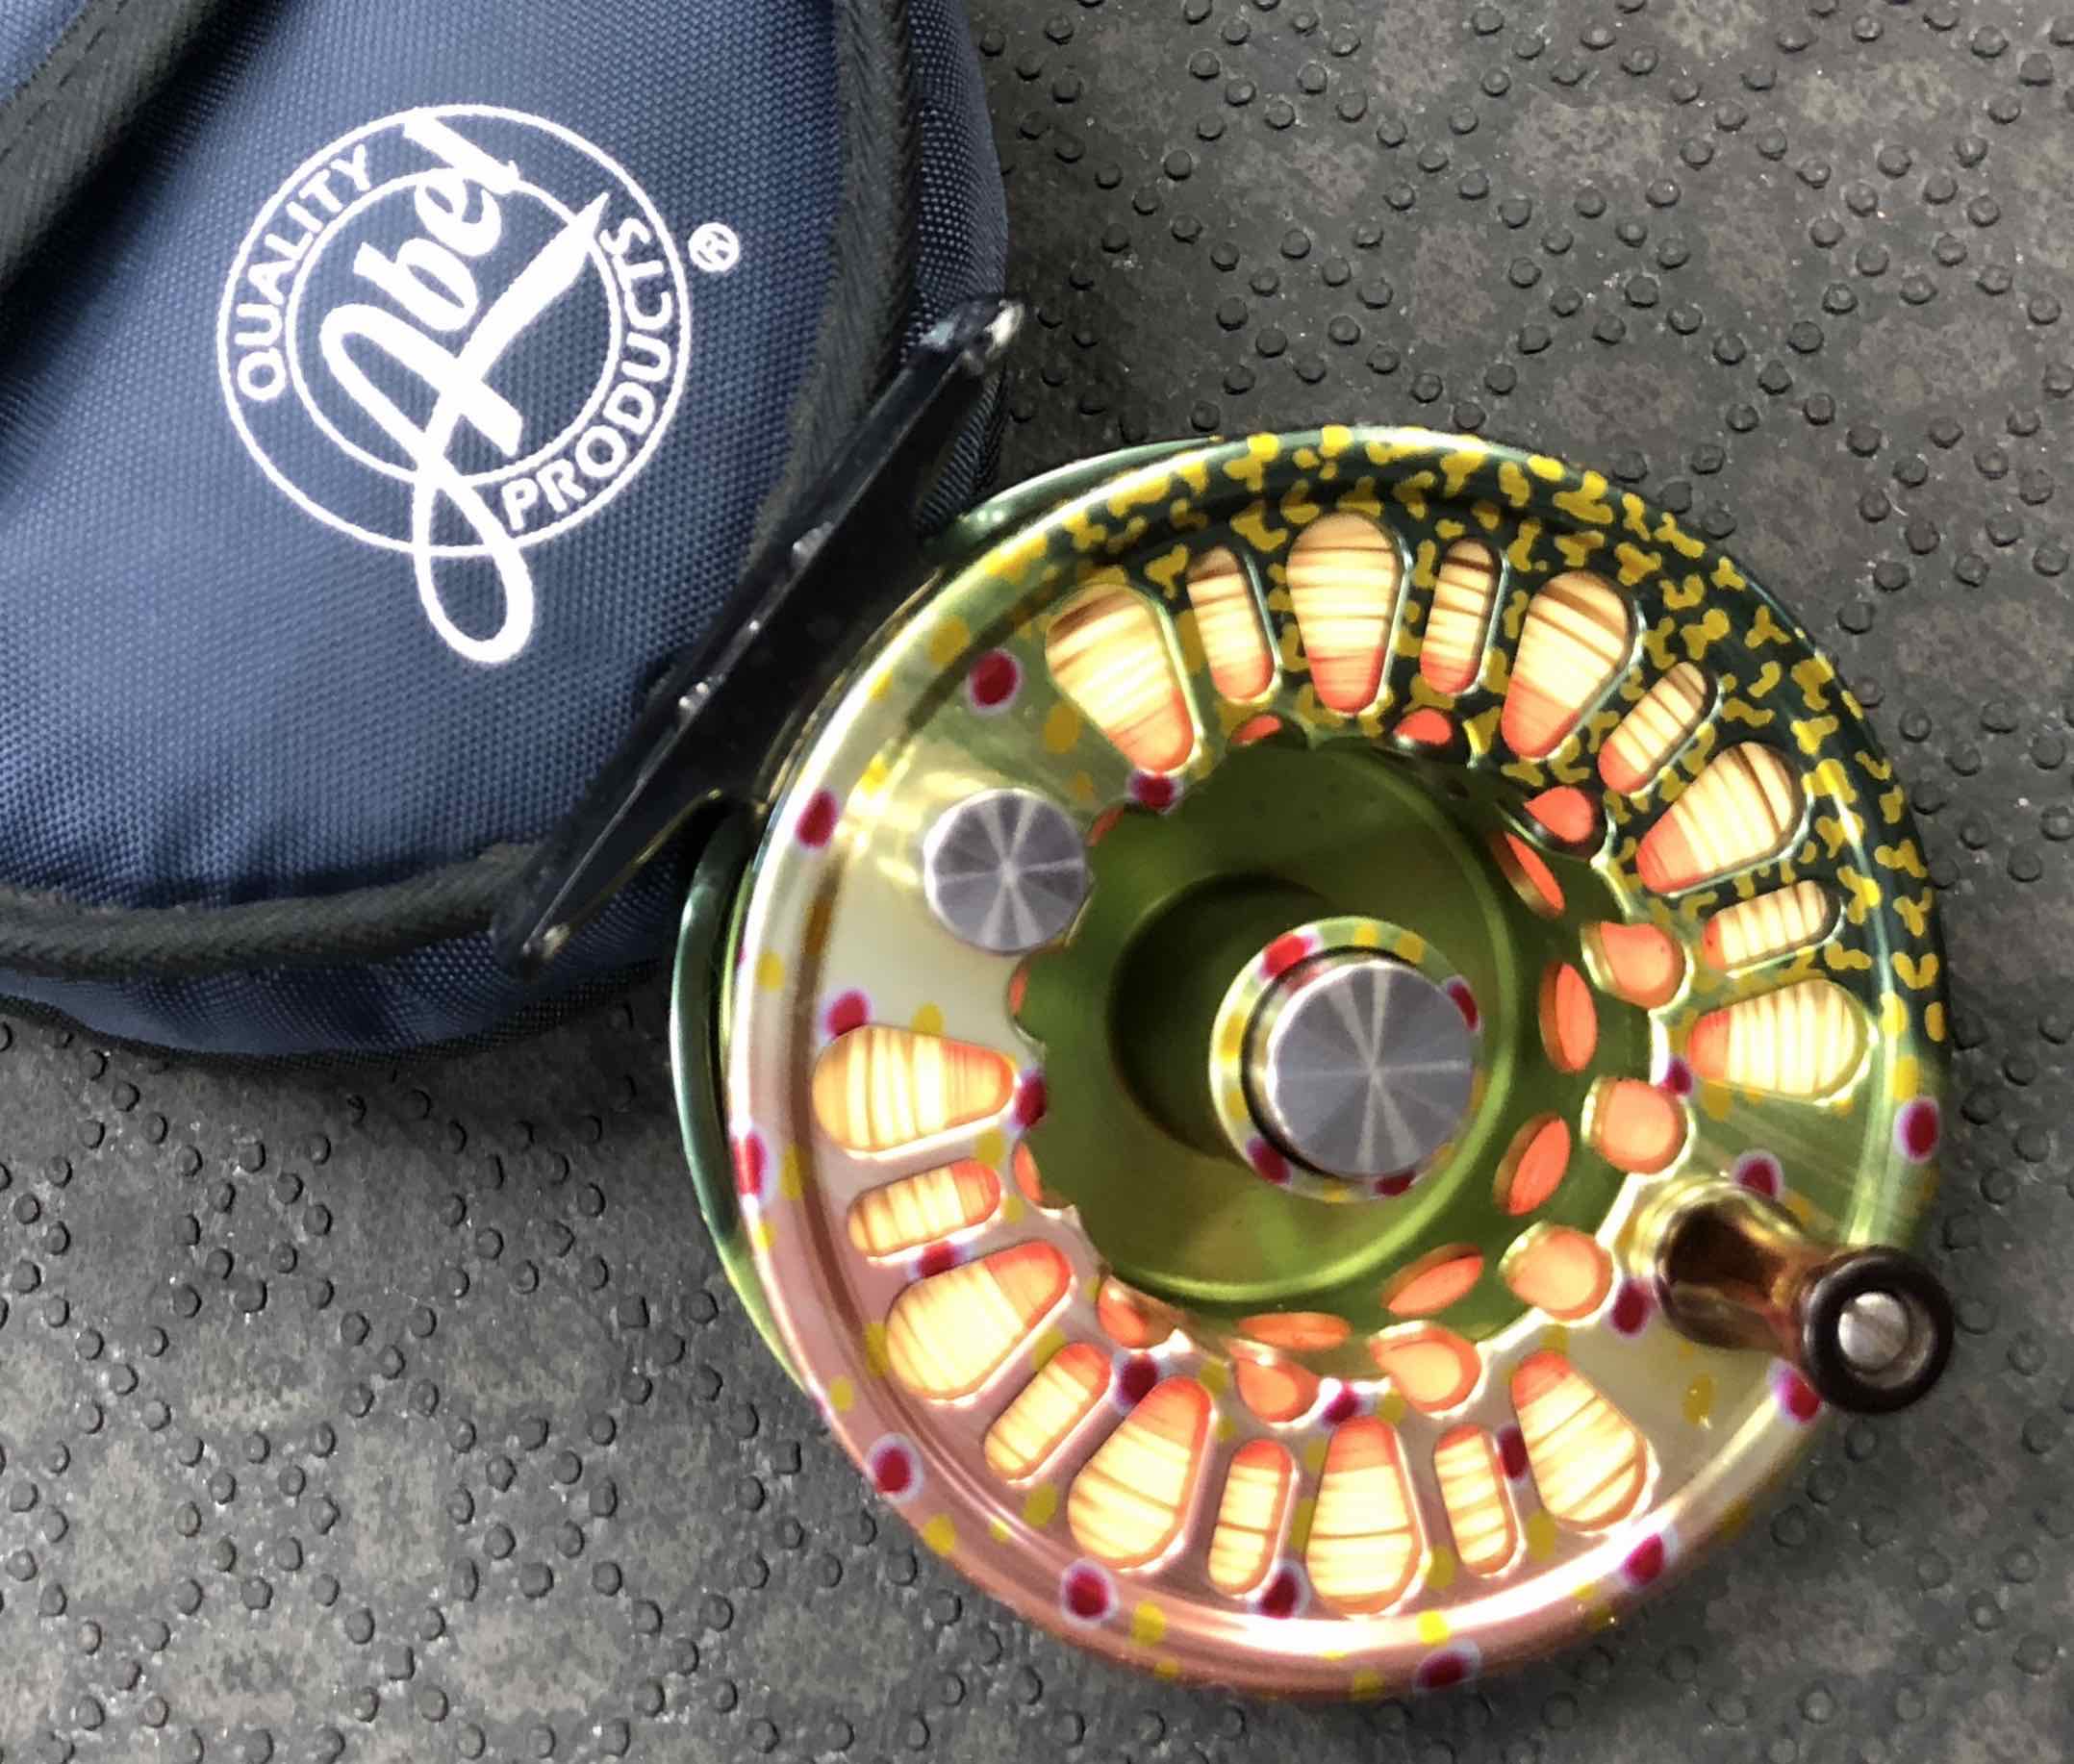 https://thefirstcast.ca/wp-content/uploads/2018/09/Abel-super-series-5wt-reel-with-optional-brook-trout-graphic-and-case-BB.jpg